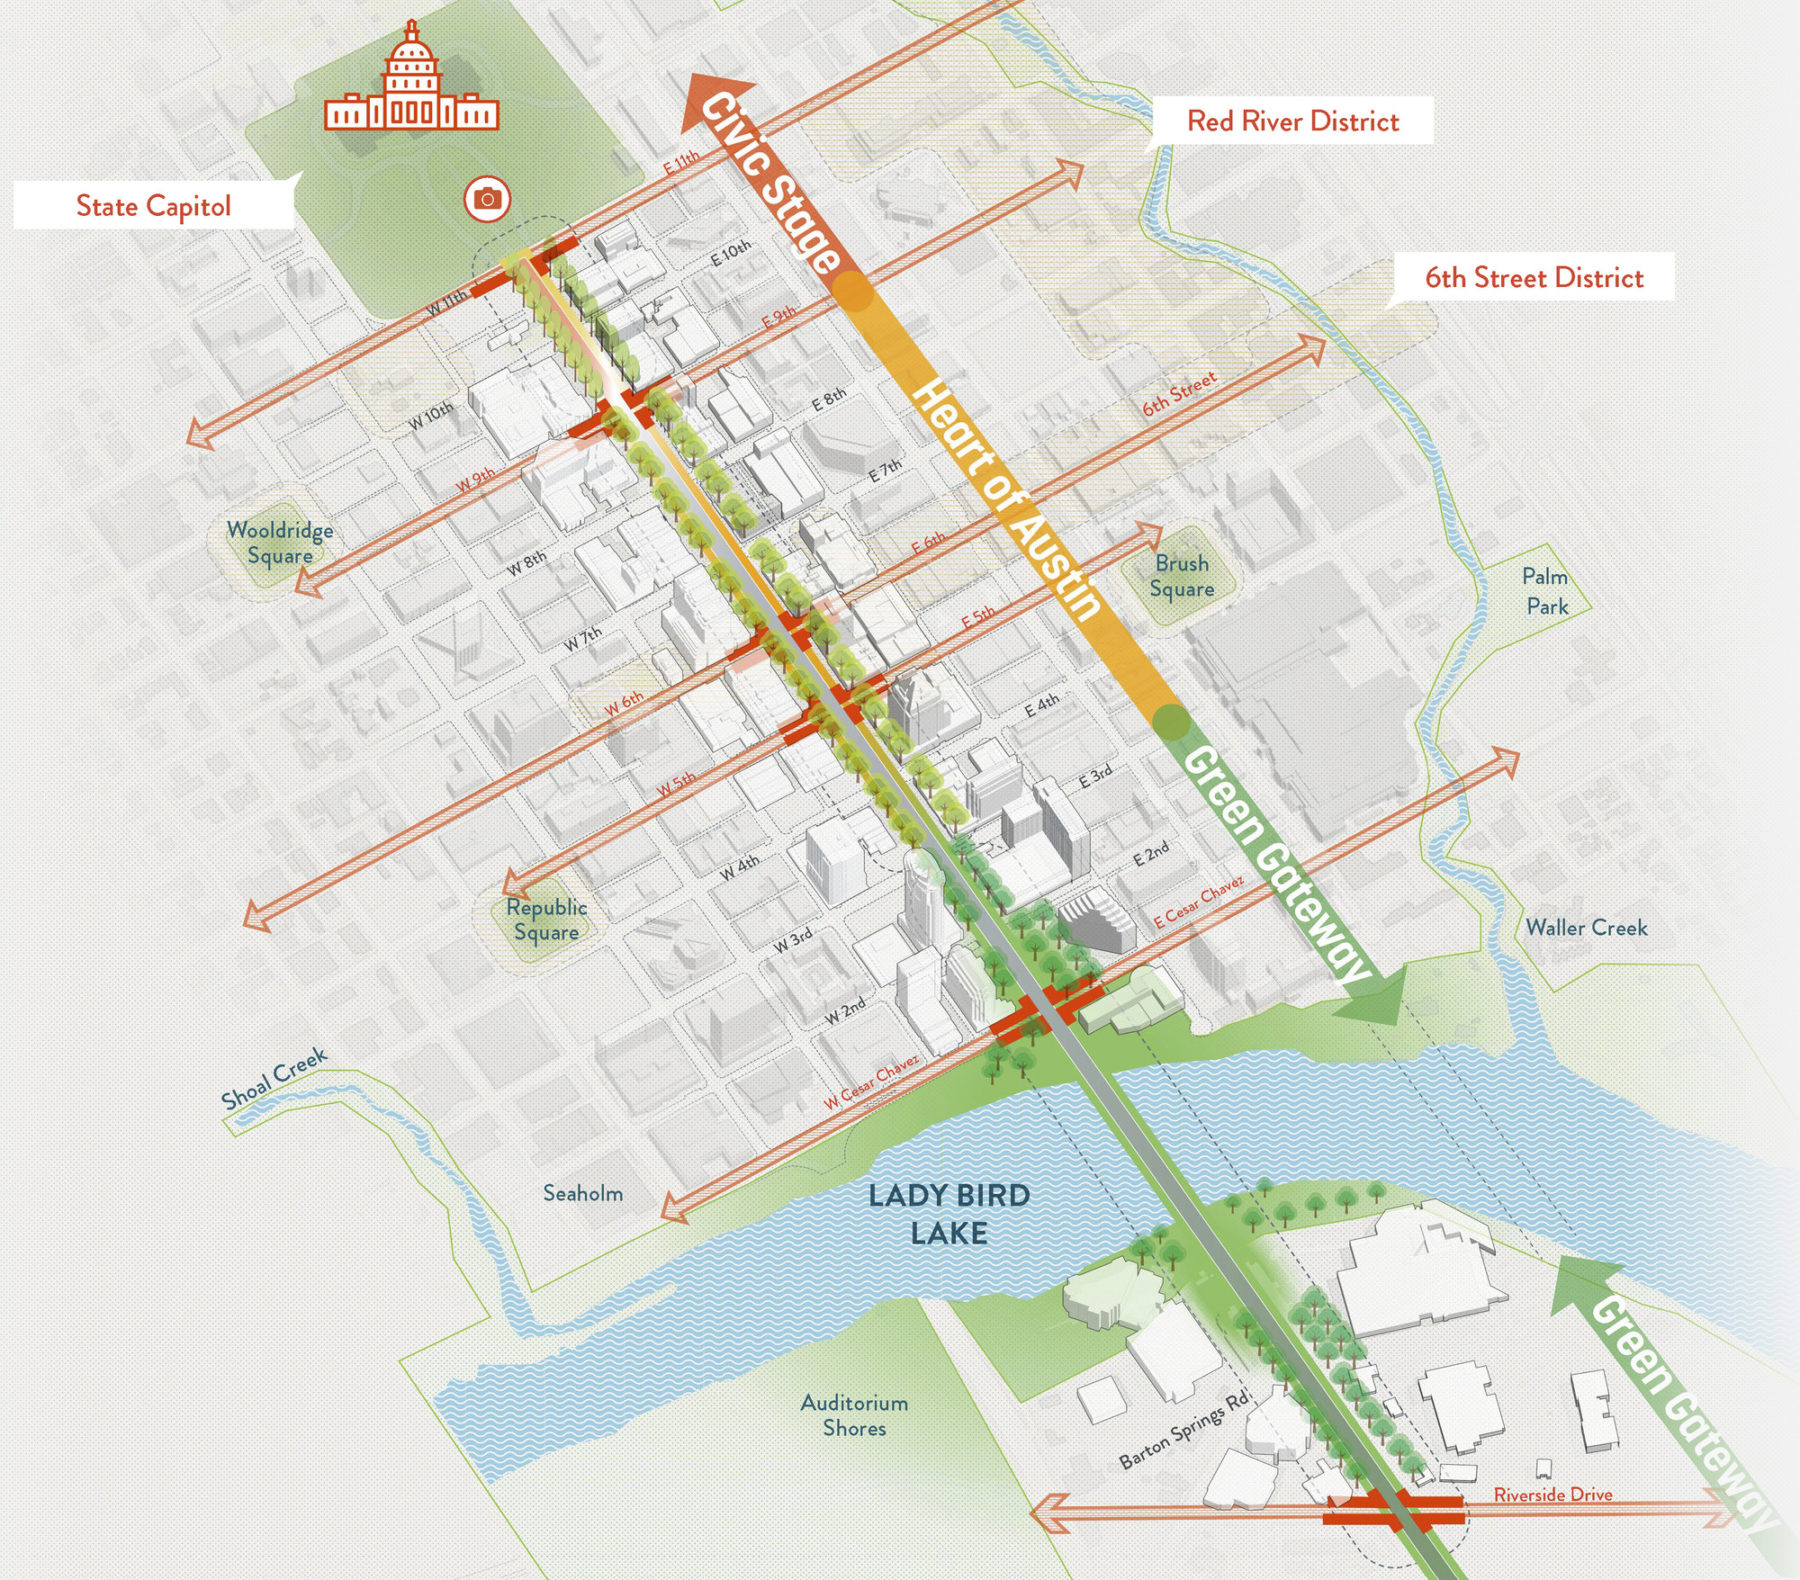 Aerial axon diagram of avenue that calls out major landmarks and notes the zones as the street moves from the state capitol down to Lady Bird Lake